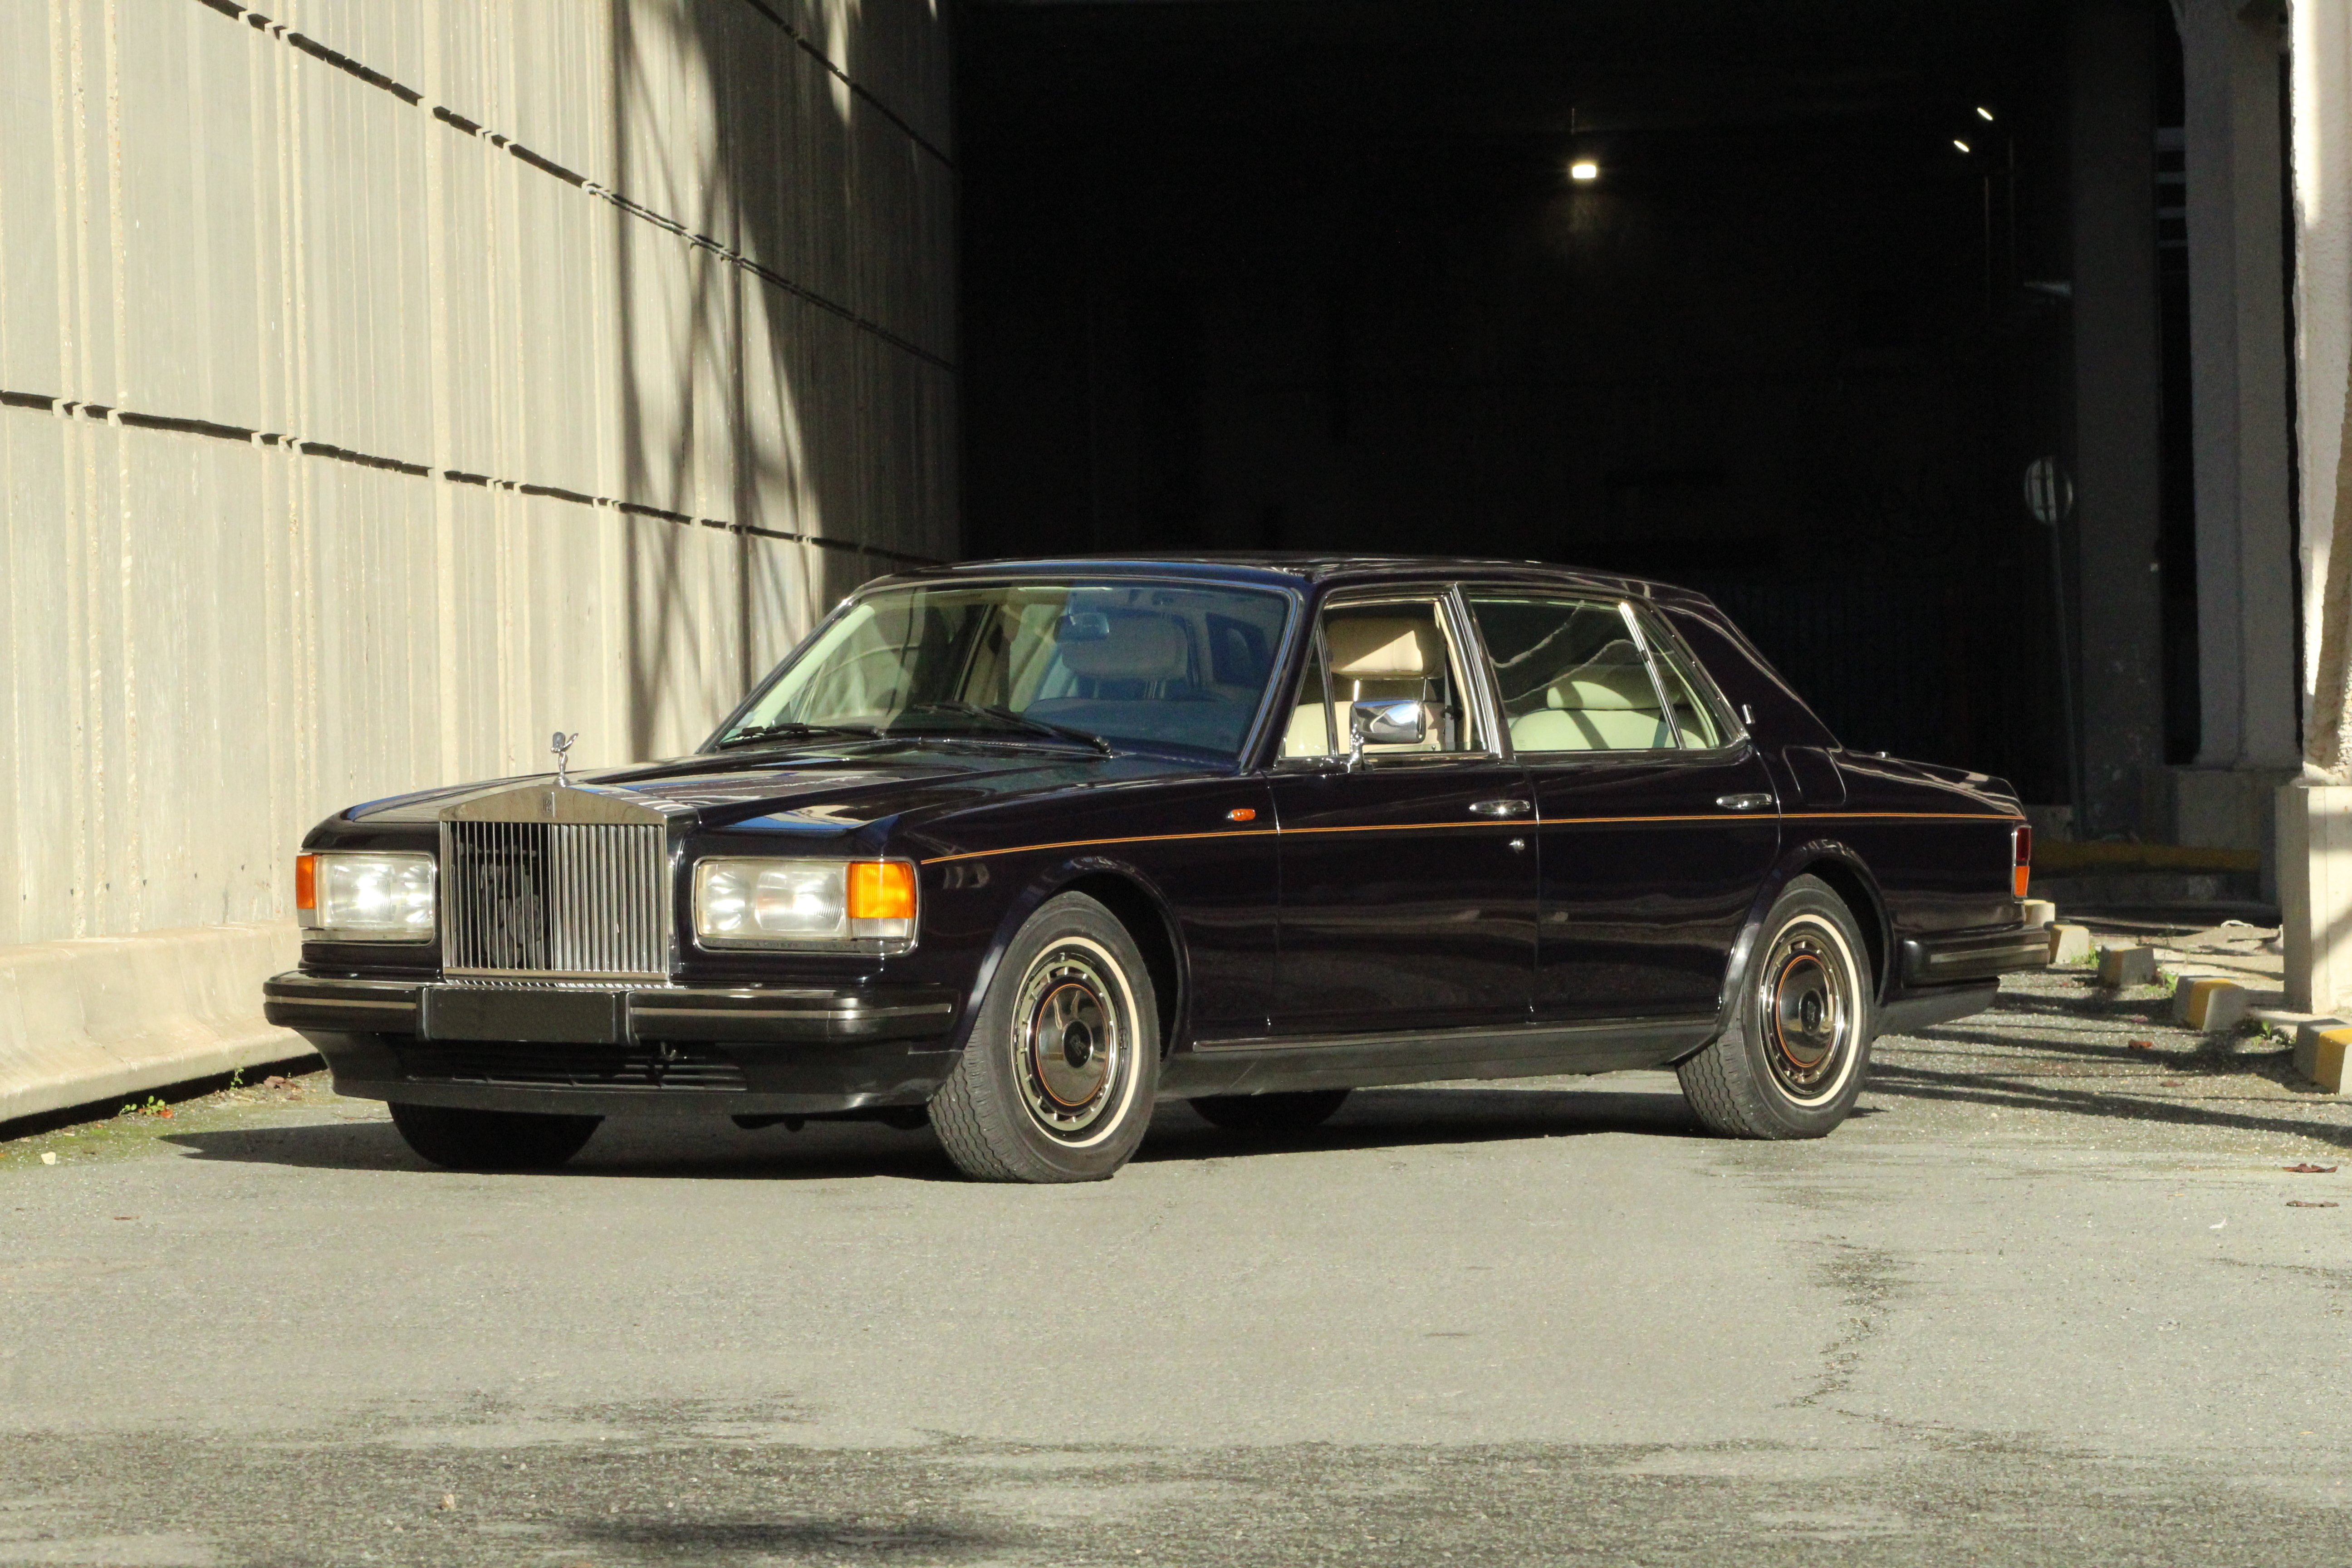 For Sale RollsRoyce Silver Spur 1988 offered for 22185